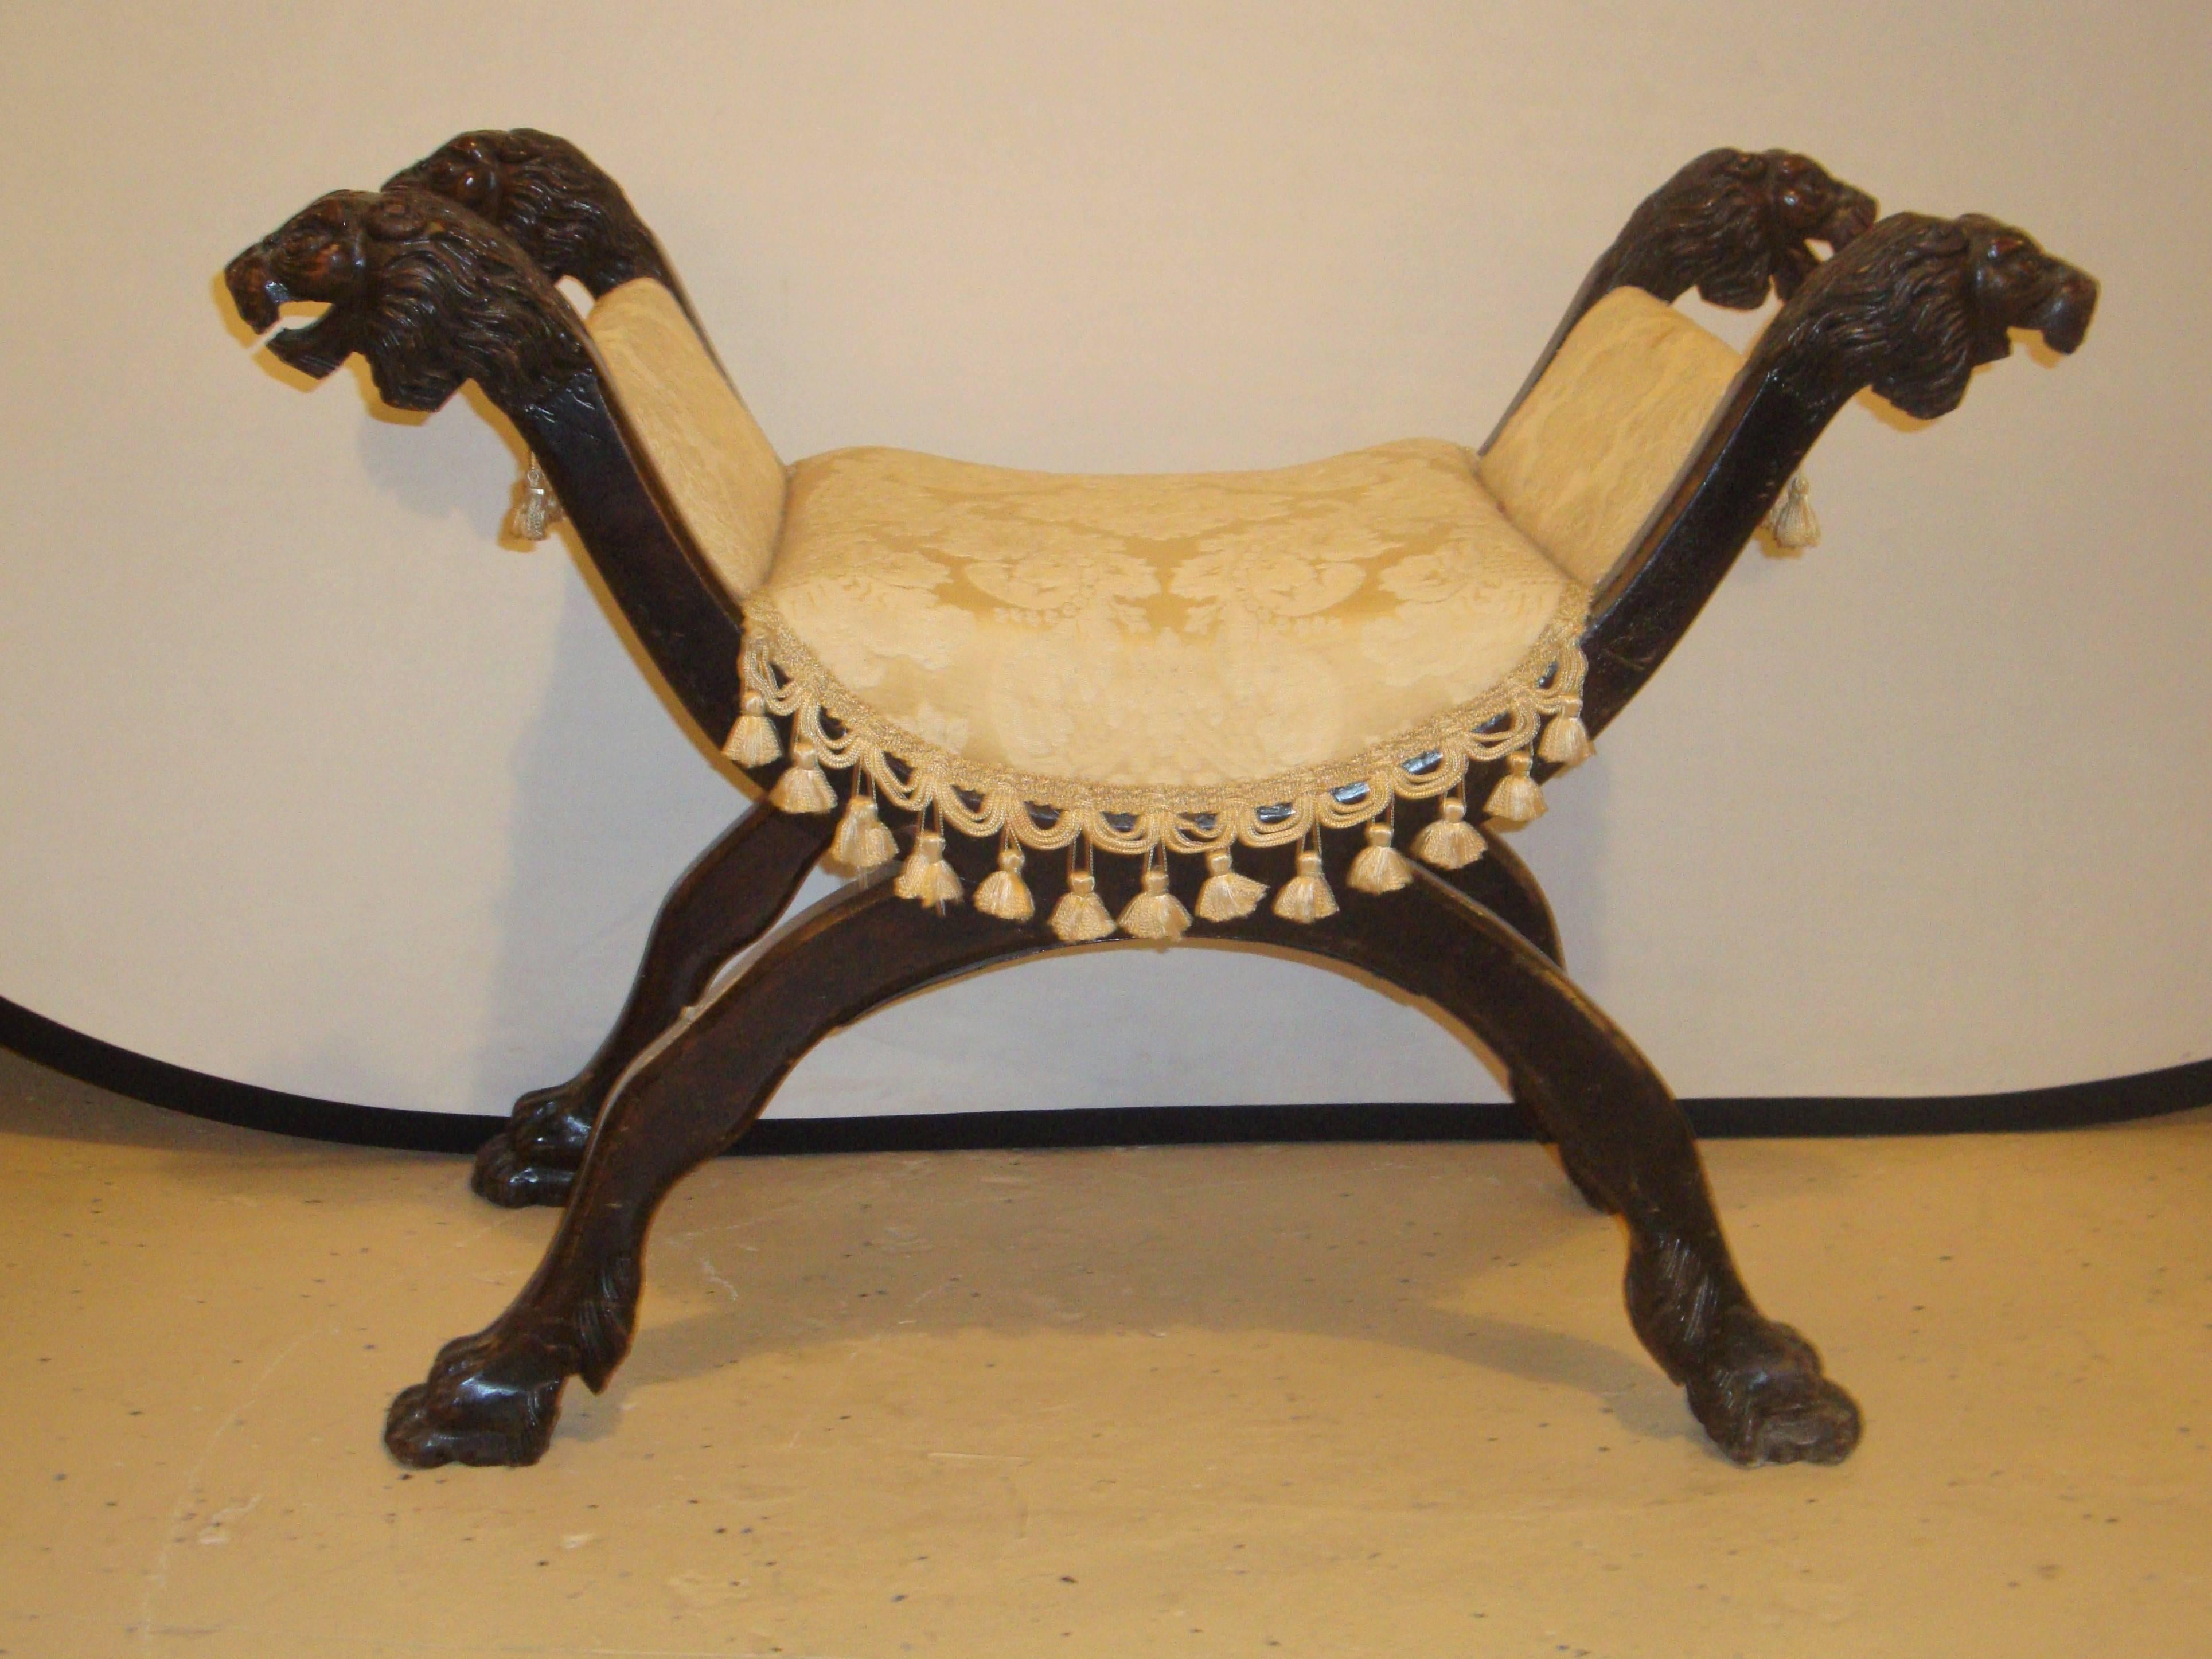 19th century lion head X bench. A finely carved and detailed bench in the X-form with carved lion heads.